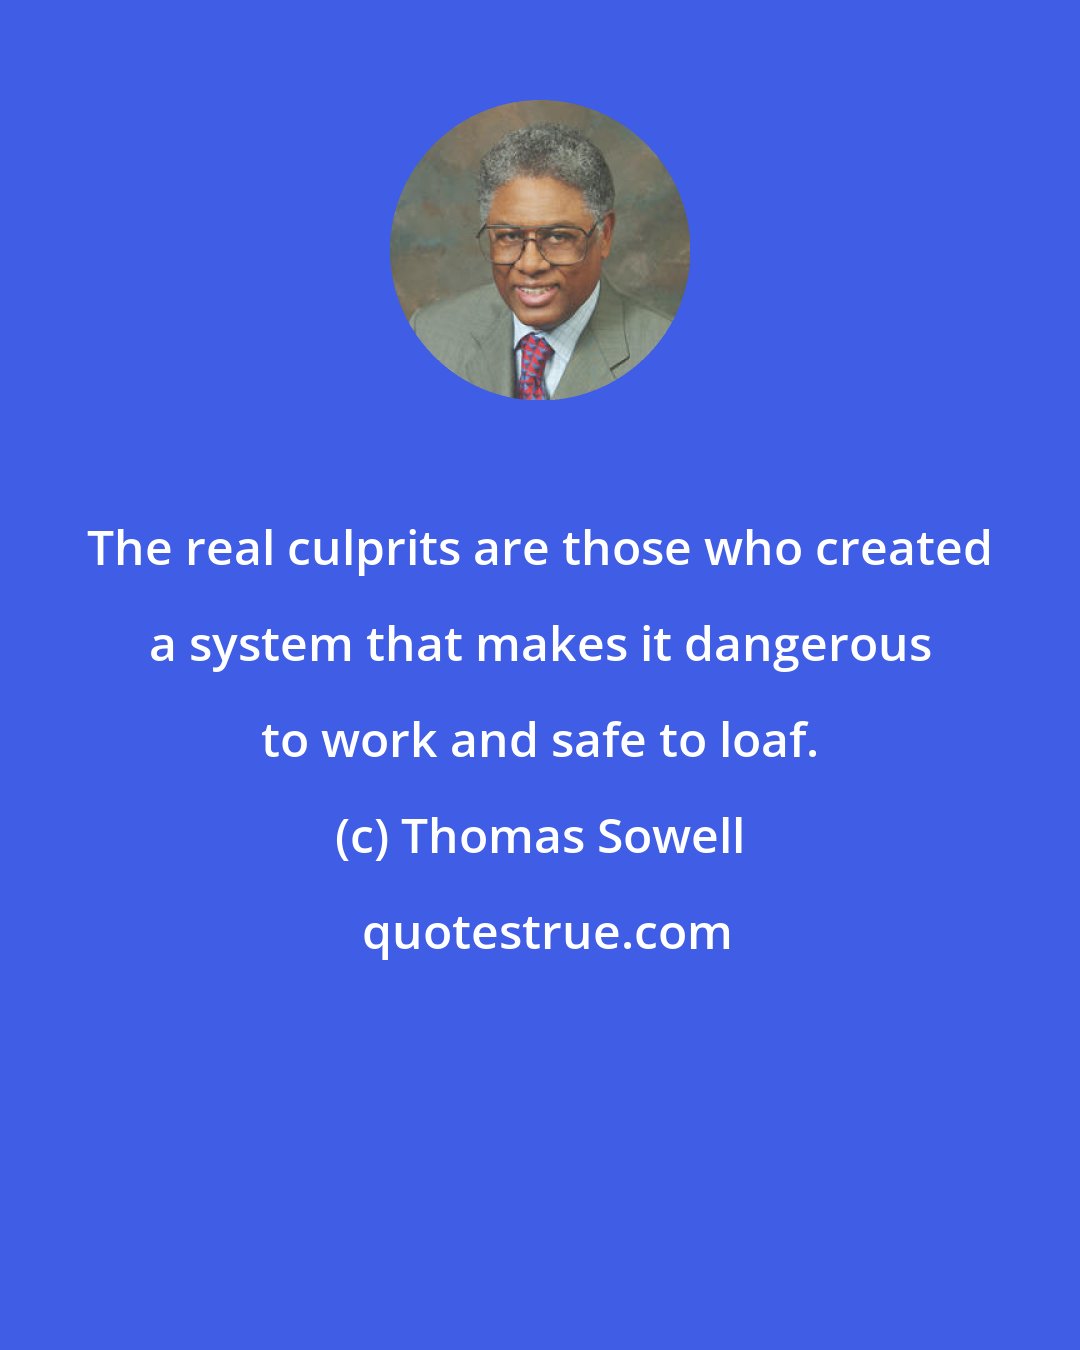 Thomas Sowell: The real culprits are those who created a system that makes it dangerous to work and safe to loaf.